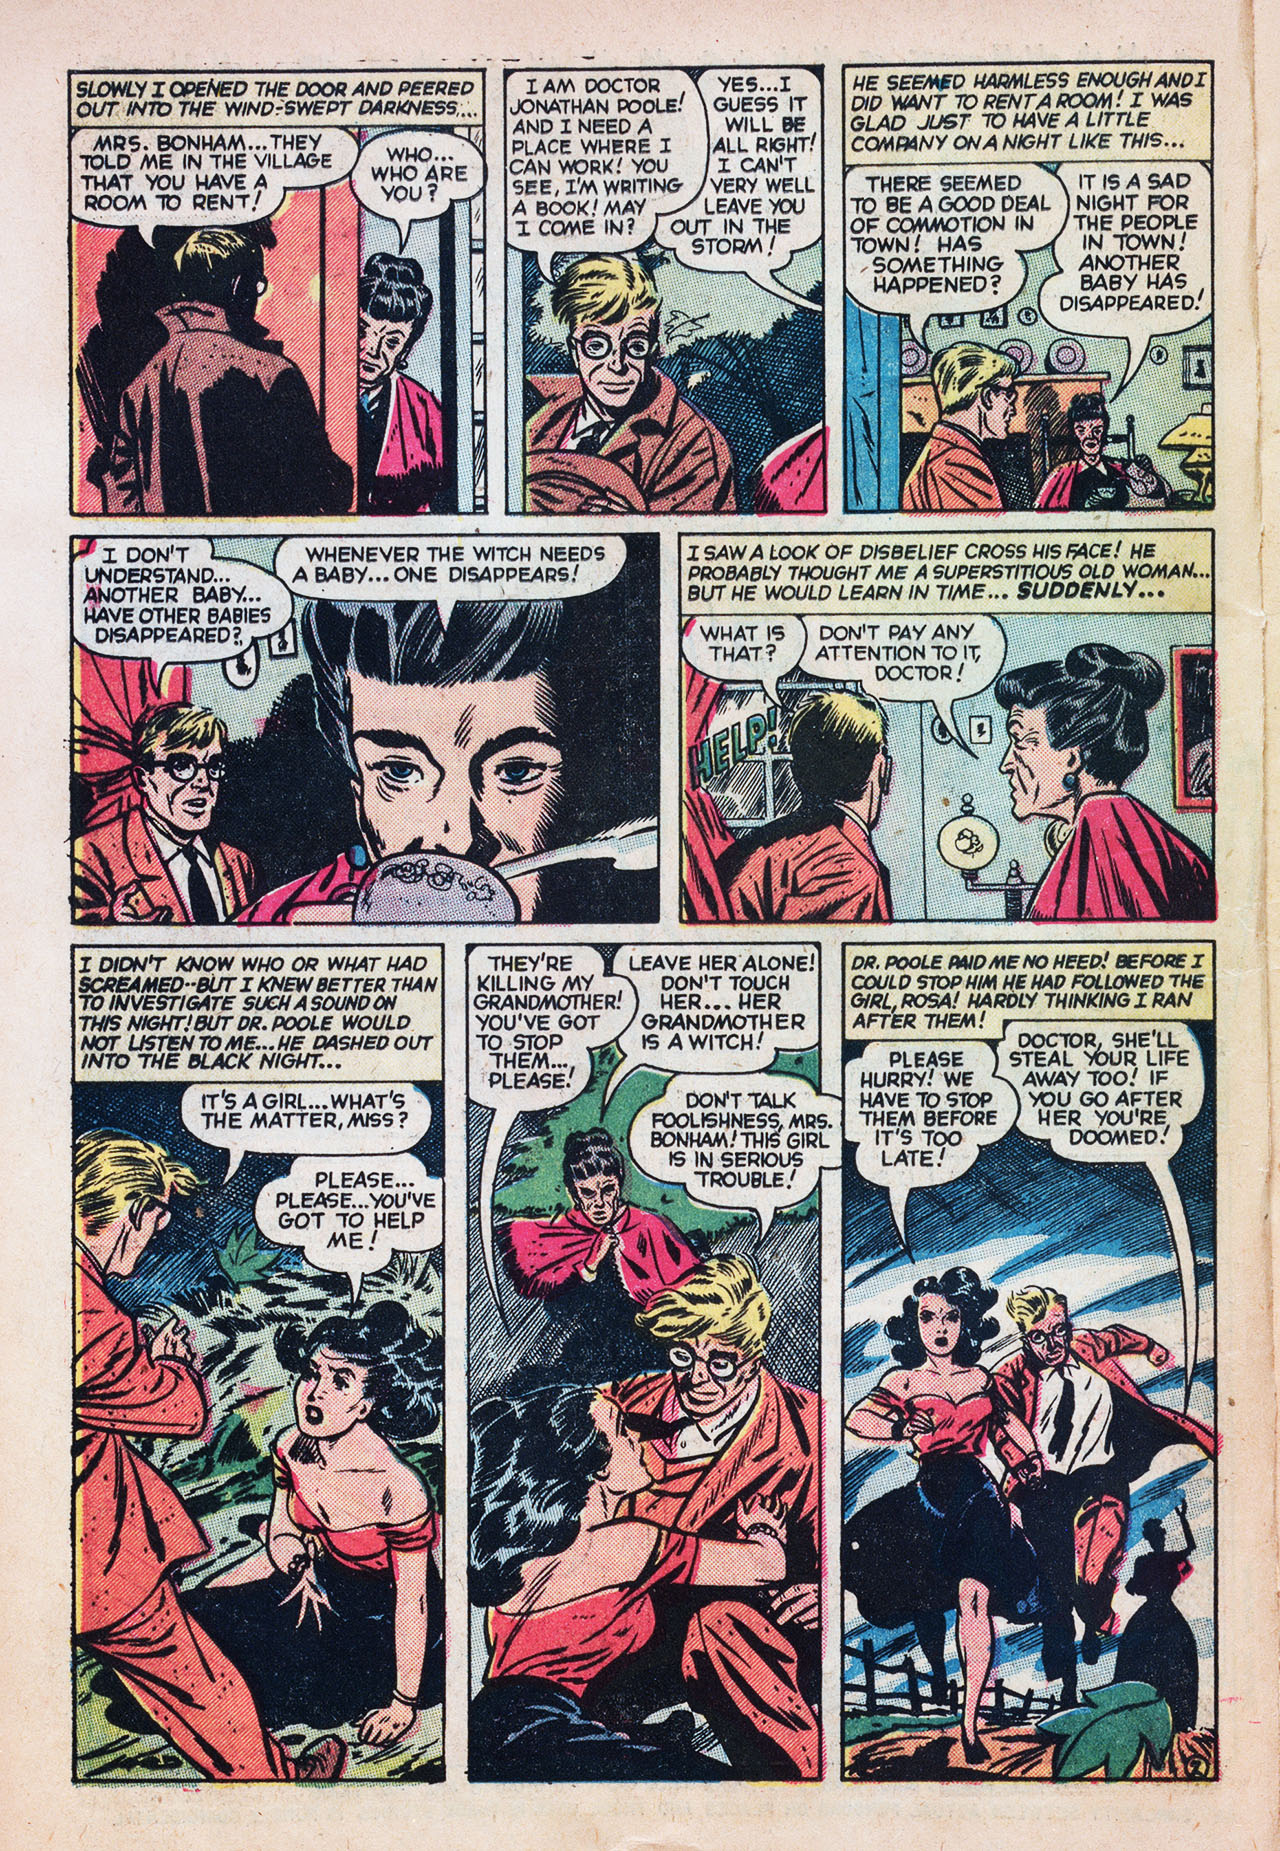 Marvel Tales (1949) 102 Page 3